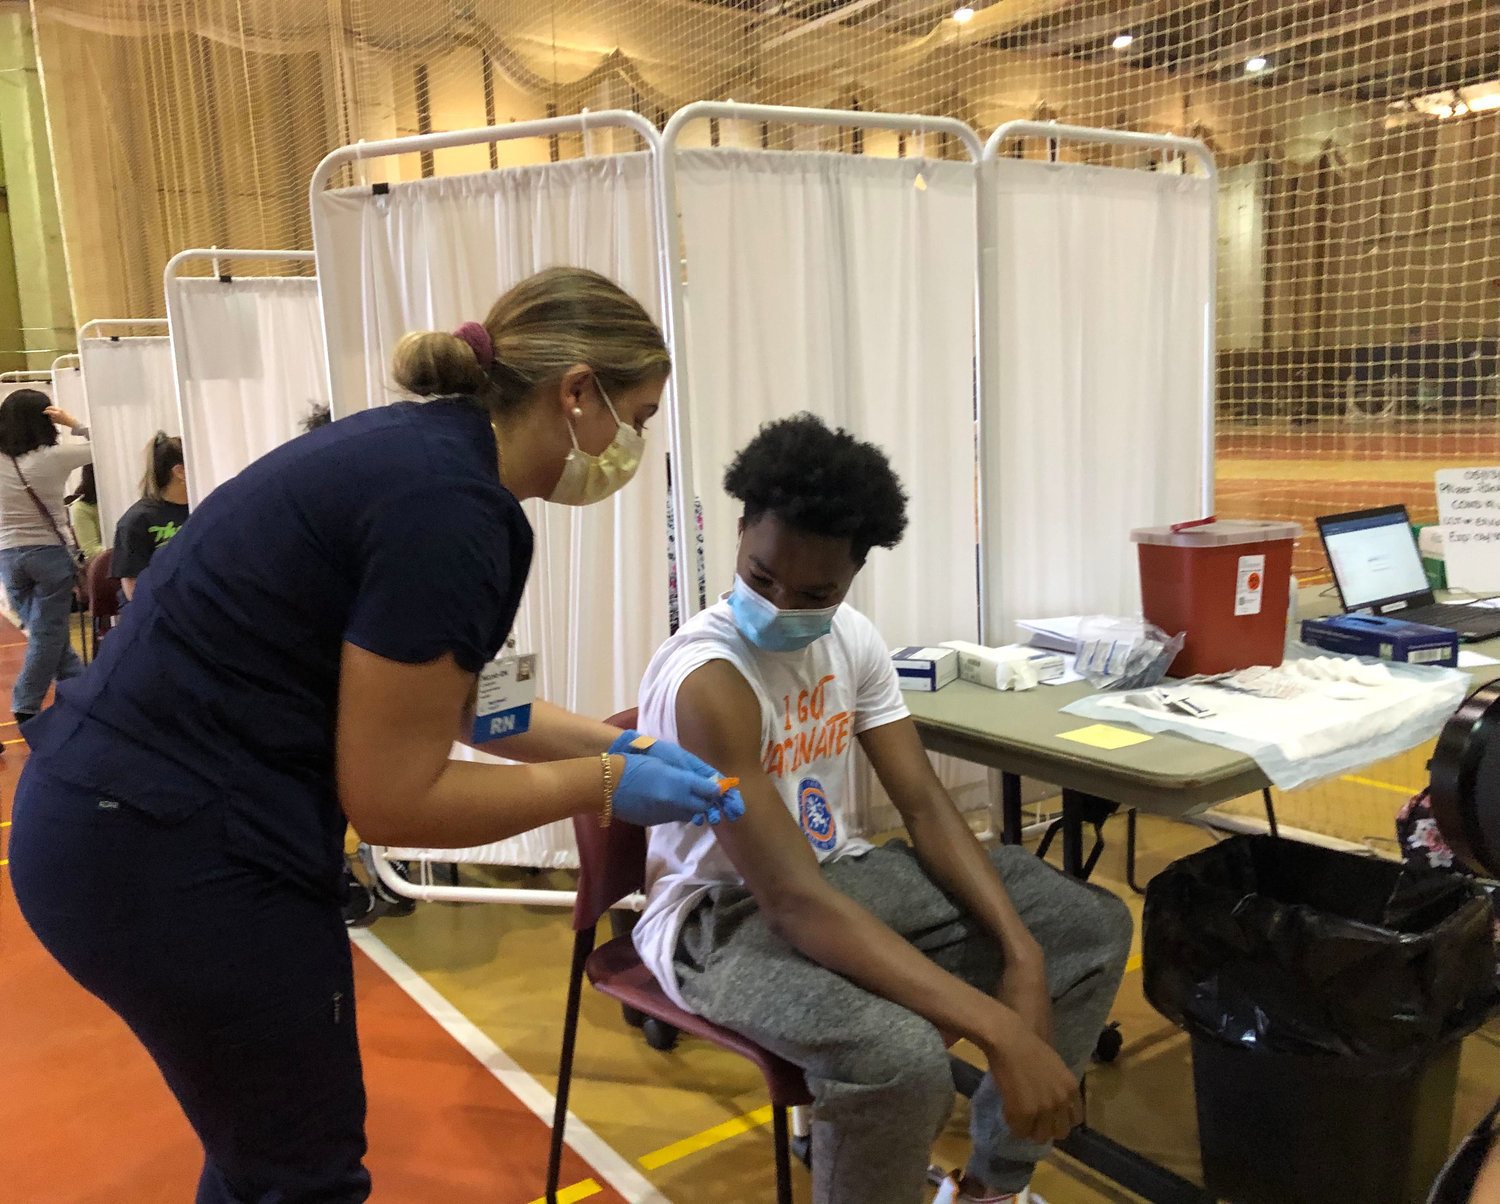 Myles Hollingsworth, 16, of Freeport, was vaccinated on May 13 at the Nassau Community College vaccination site for adolescents.